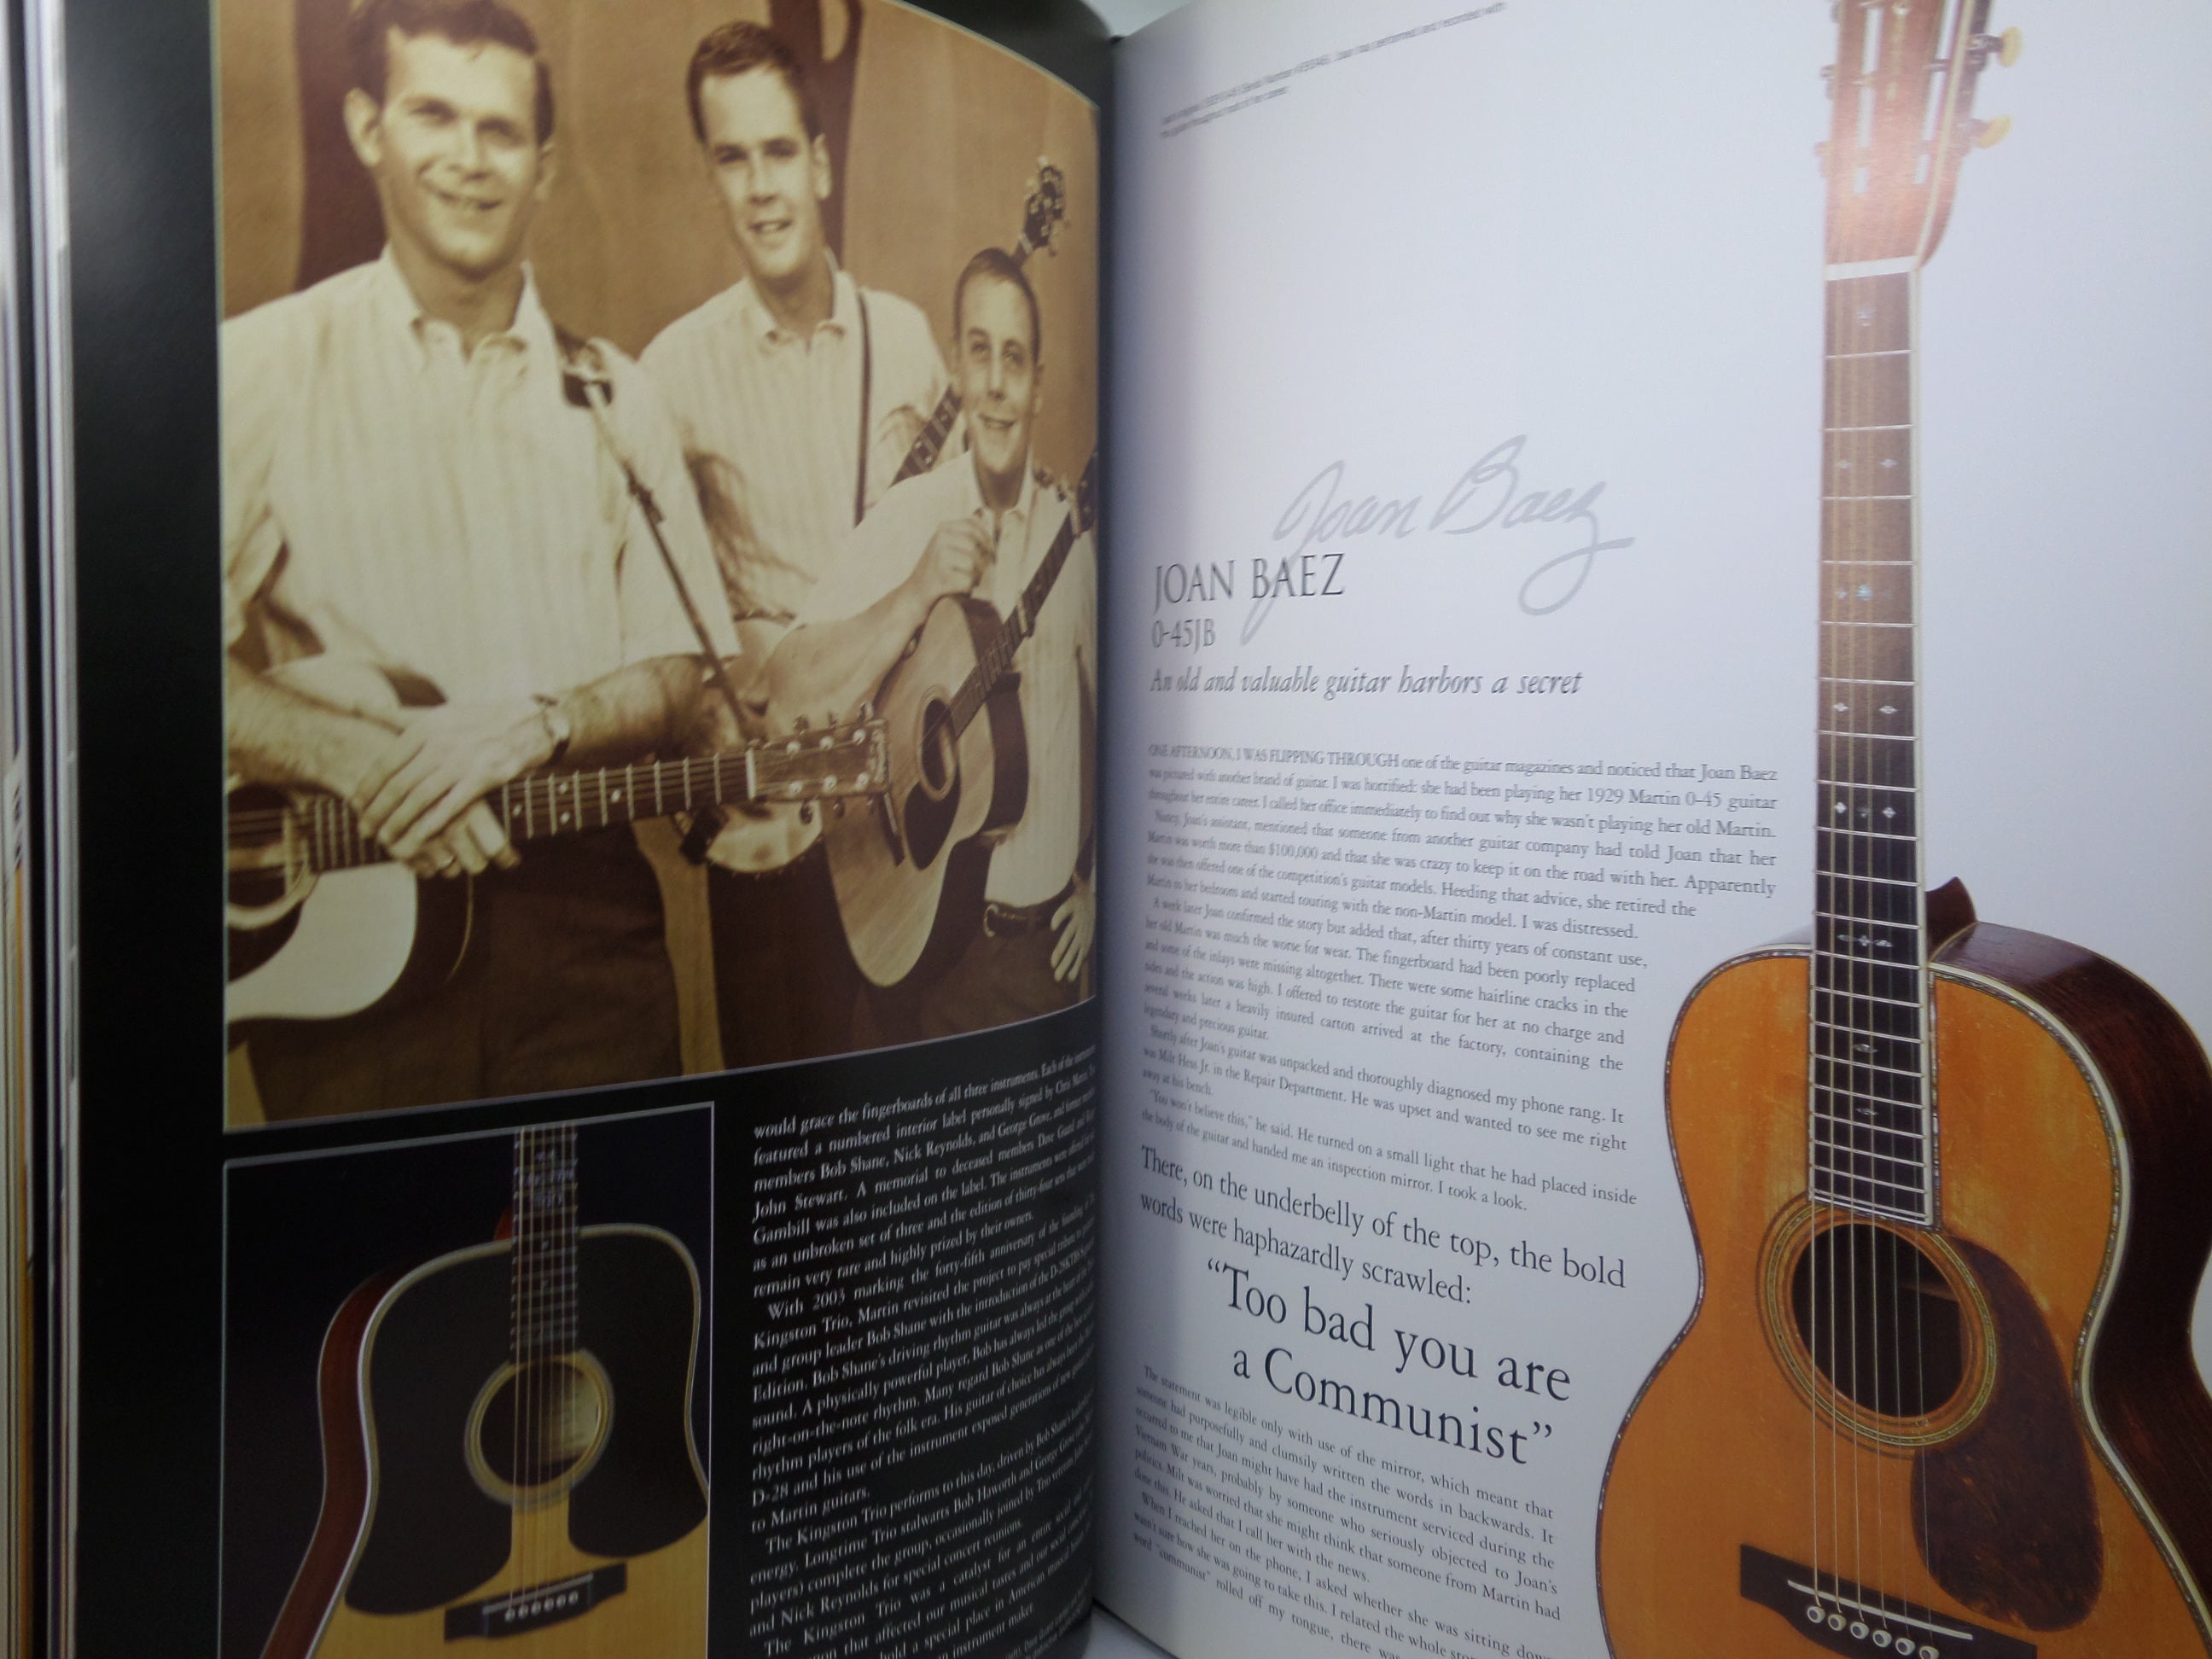 MARTIN GUITAR MASTERPIECES BY DICK BOAK 2003 FIRST EDITION HARDCOVER